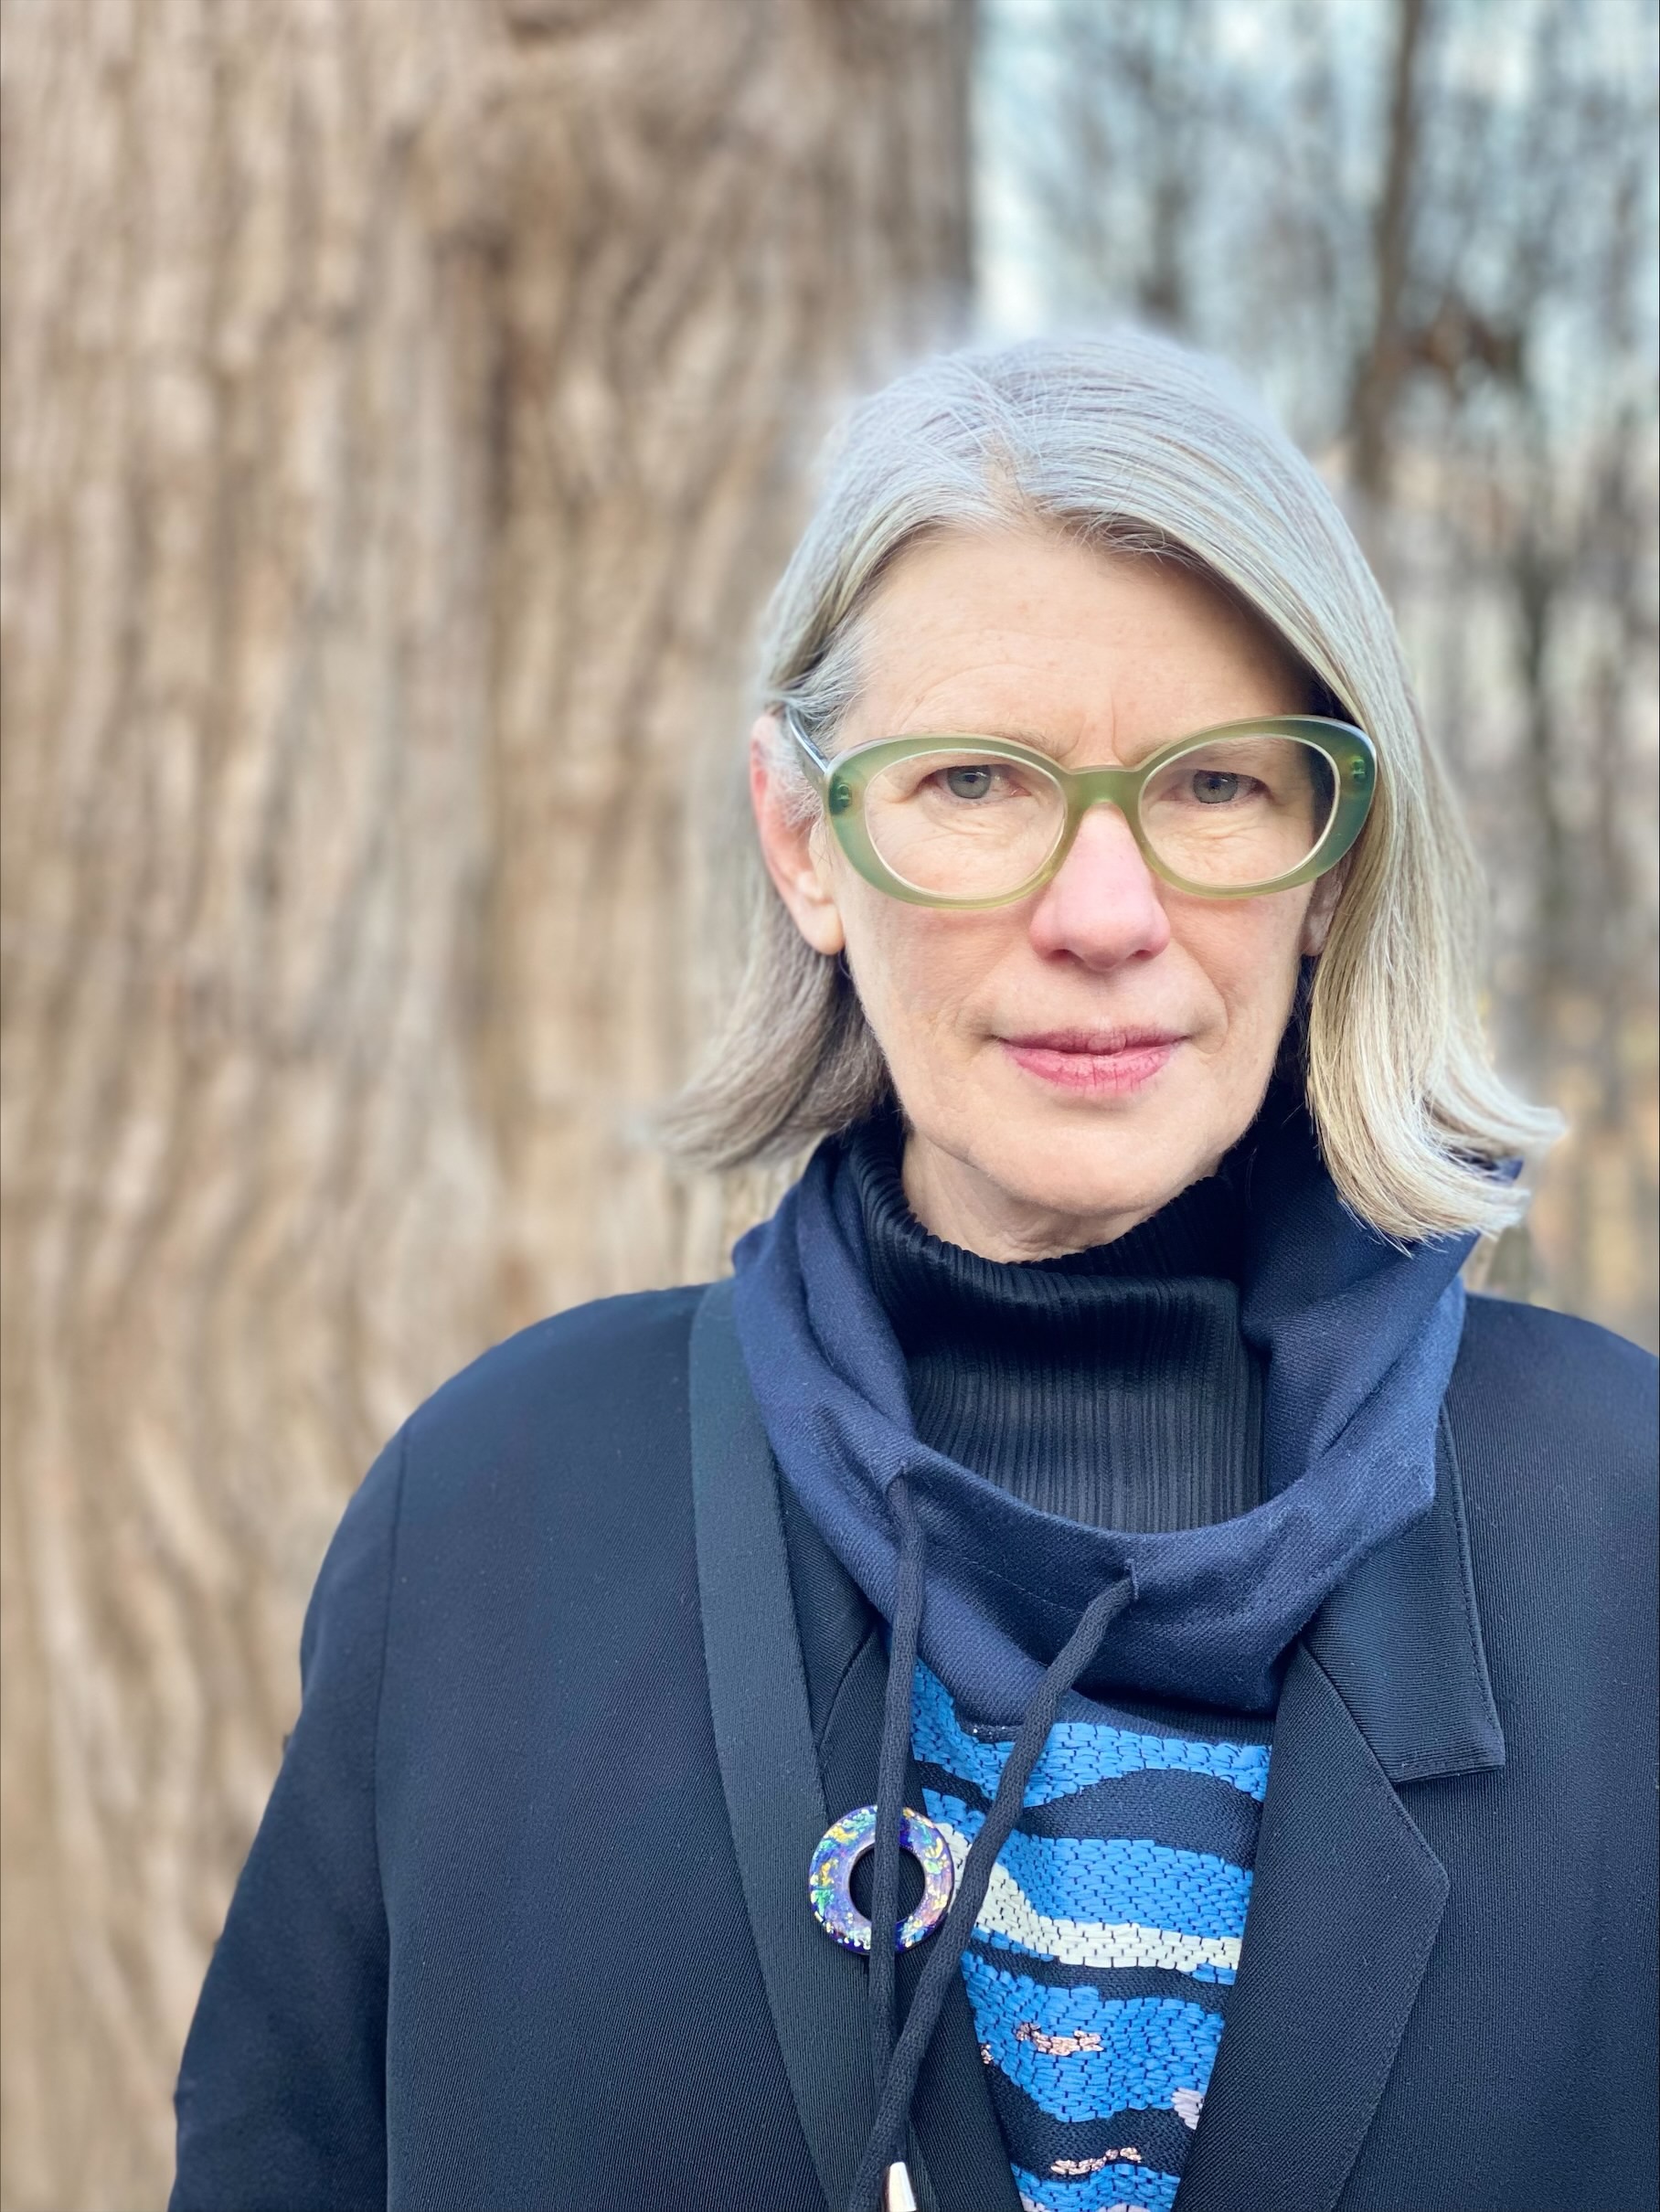 Lisa Robertson stands outside, trees visible in the background but out of focus. She is looking at the camera, wearing green glasses, a dark blue coat, and dark blue turtleneck.